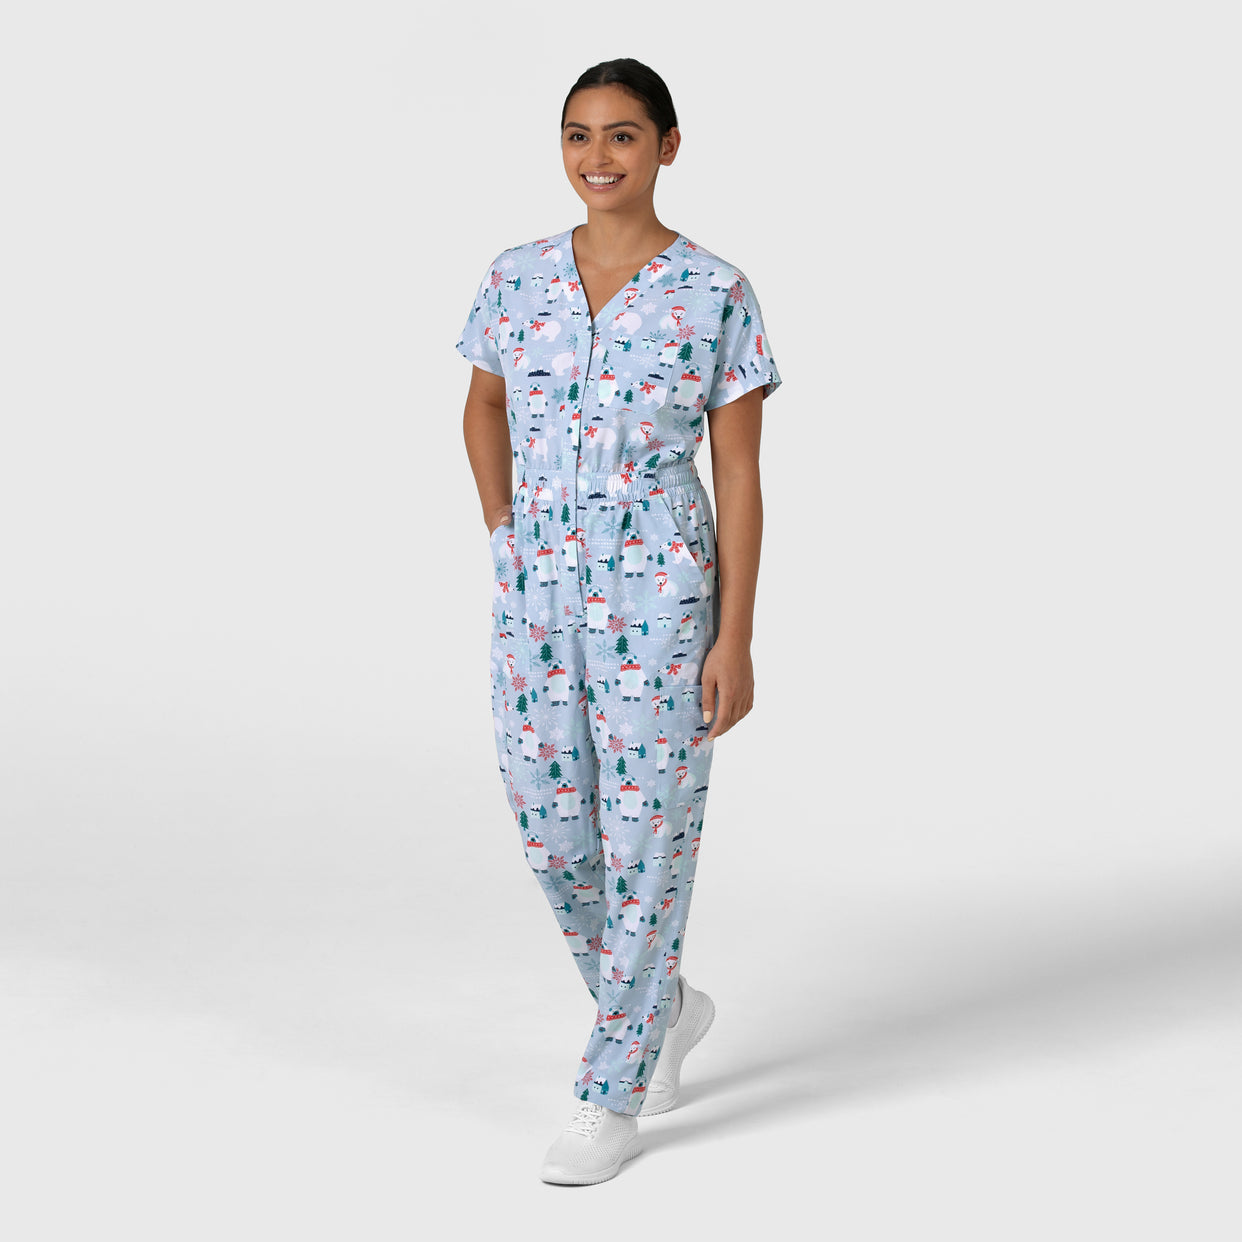 Women's Holiday Print Zip Front Onesie Beary Merry side view